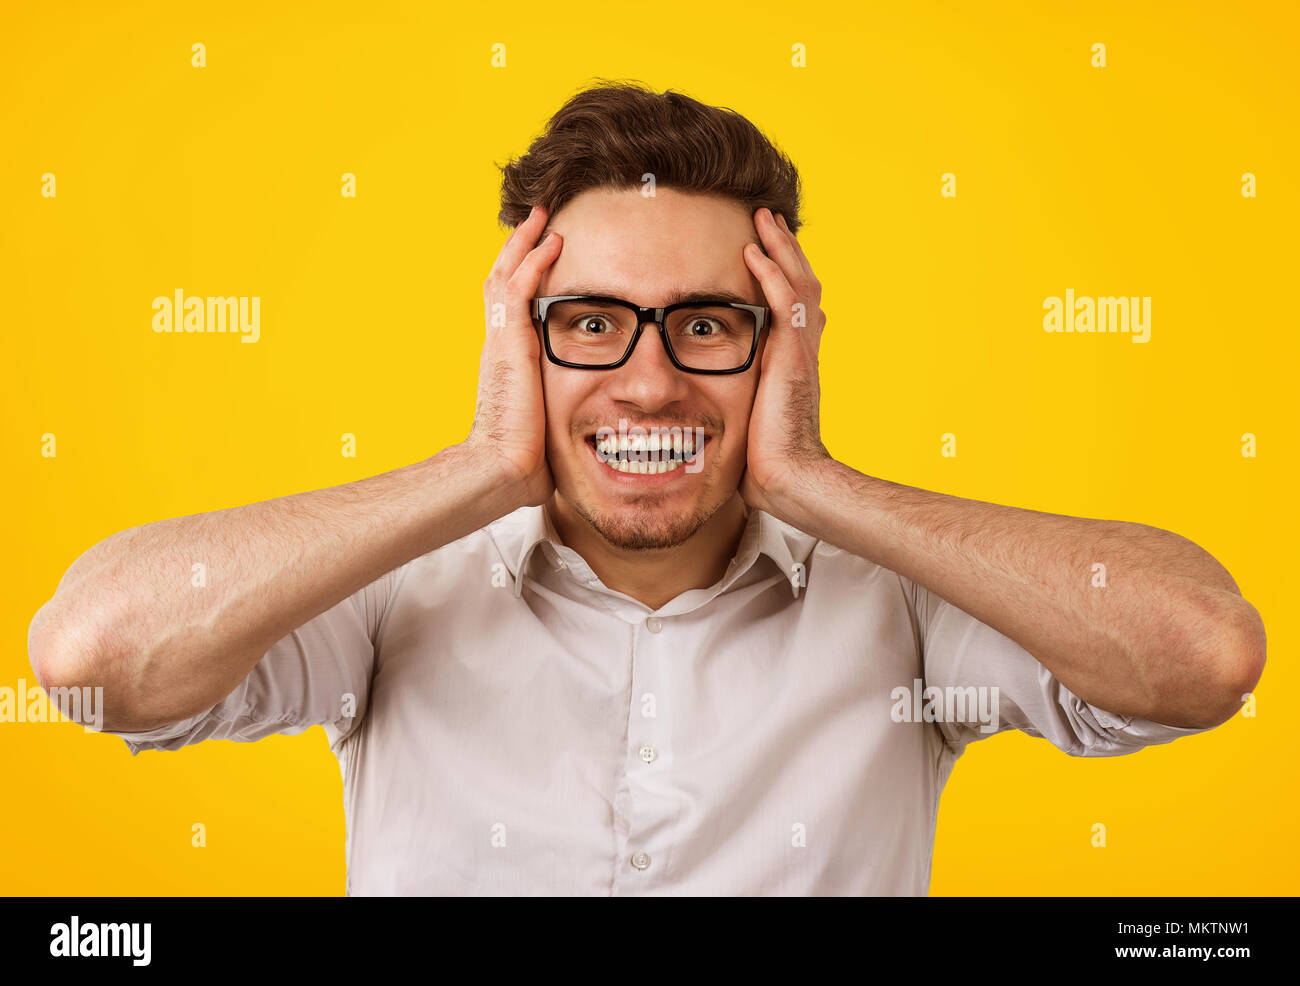 Excited young man in glasses holding hands on head in disbelief looking amazed at camera on yellow background. Stock Photo